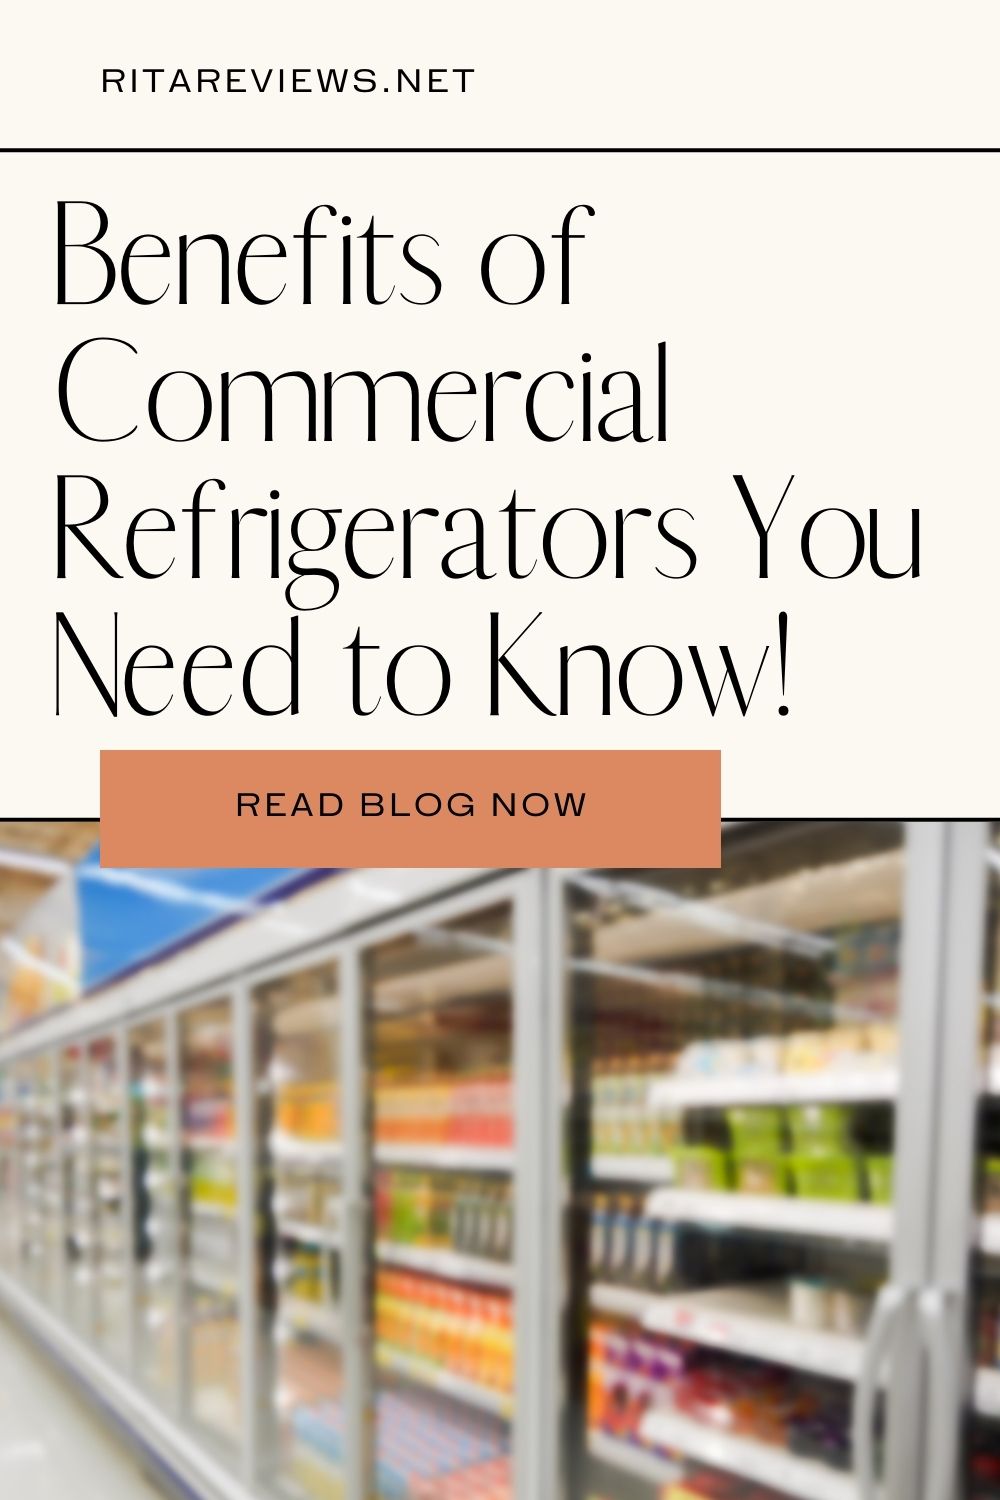 Benefits of Commercial Refrigerators You Need to Know